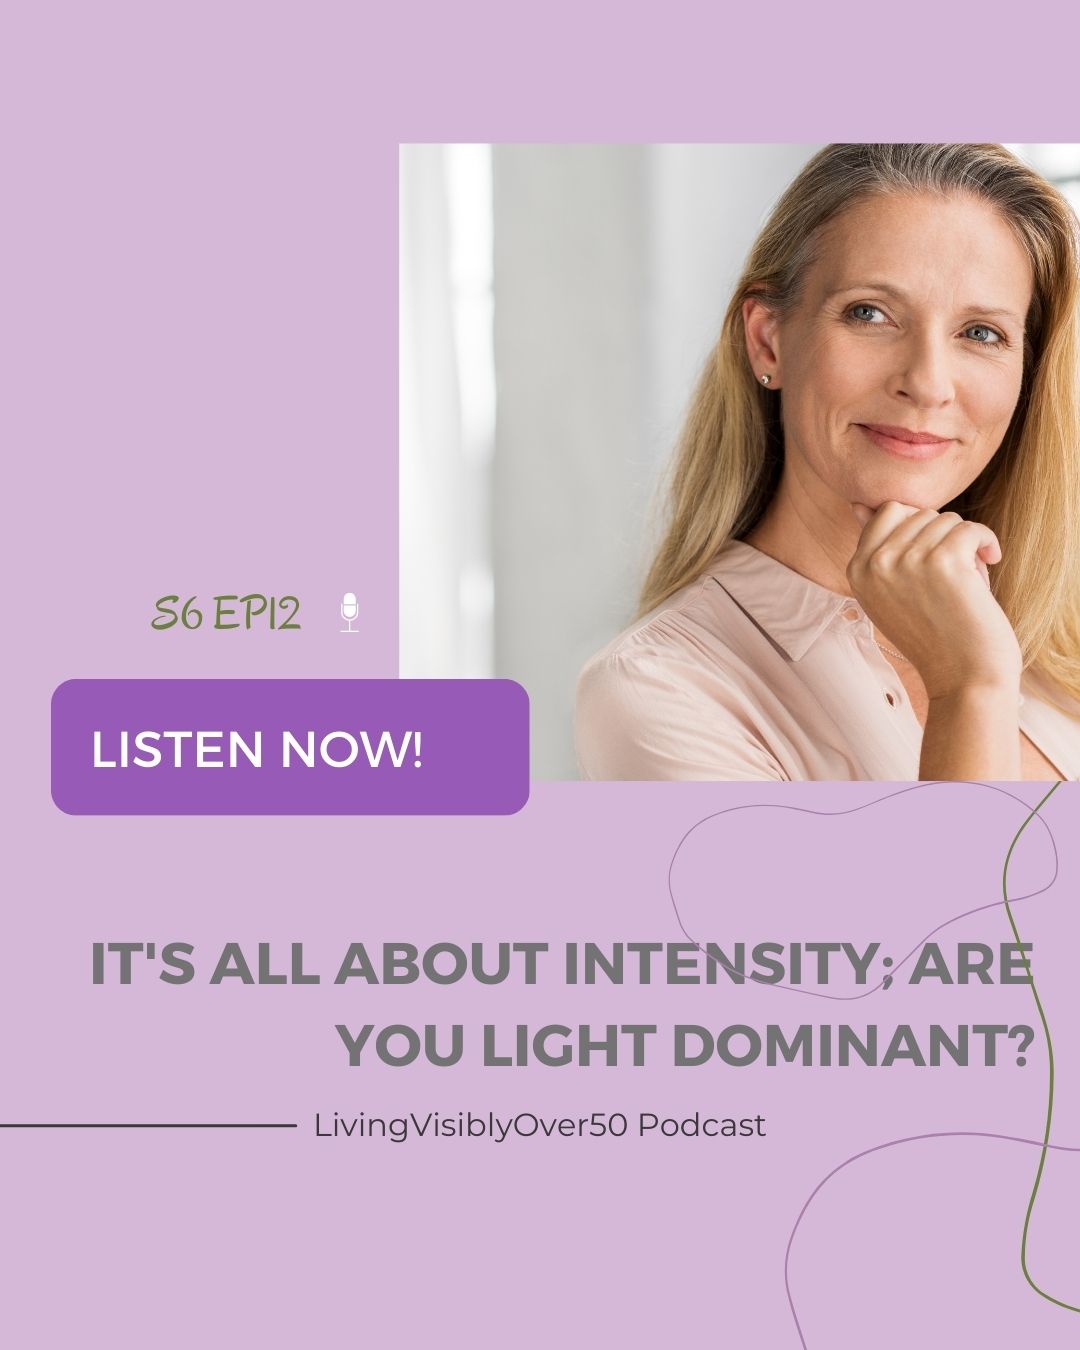 living visibly over 50 beauty style podcast